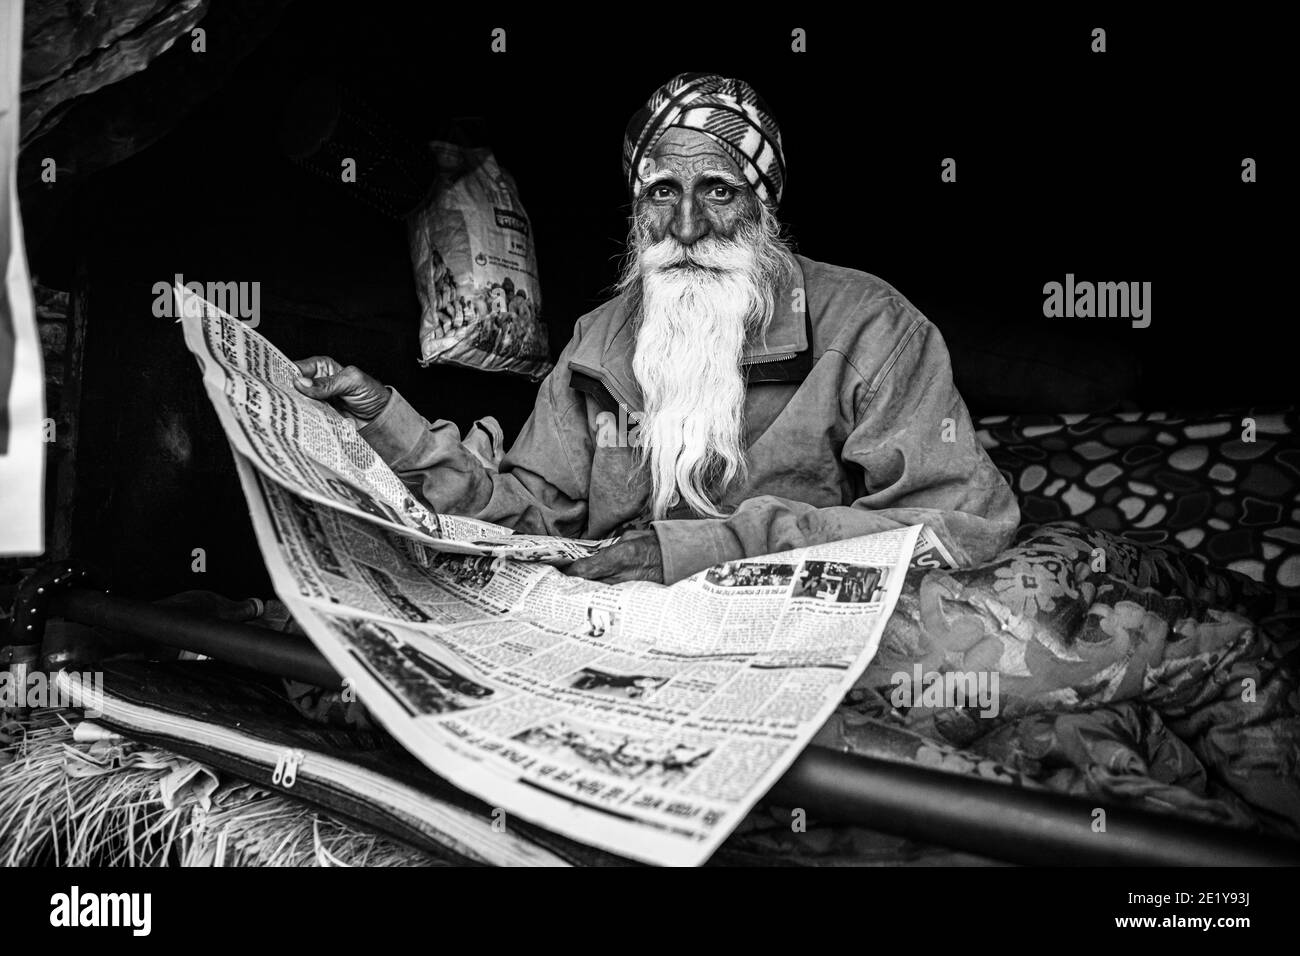 A PORTRAIT OF A FARMER PROTESTER READING NEWS PAPER AT DELHI BORDER , THEY ARE PROTESTING AGAINST NEW FARM LAW PASSED BY INDIAN GOVERNMENT. Stock Photo